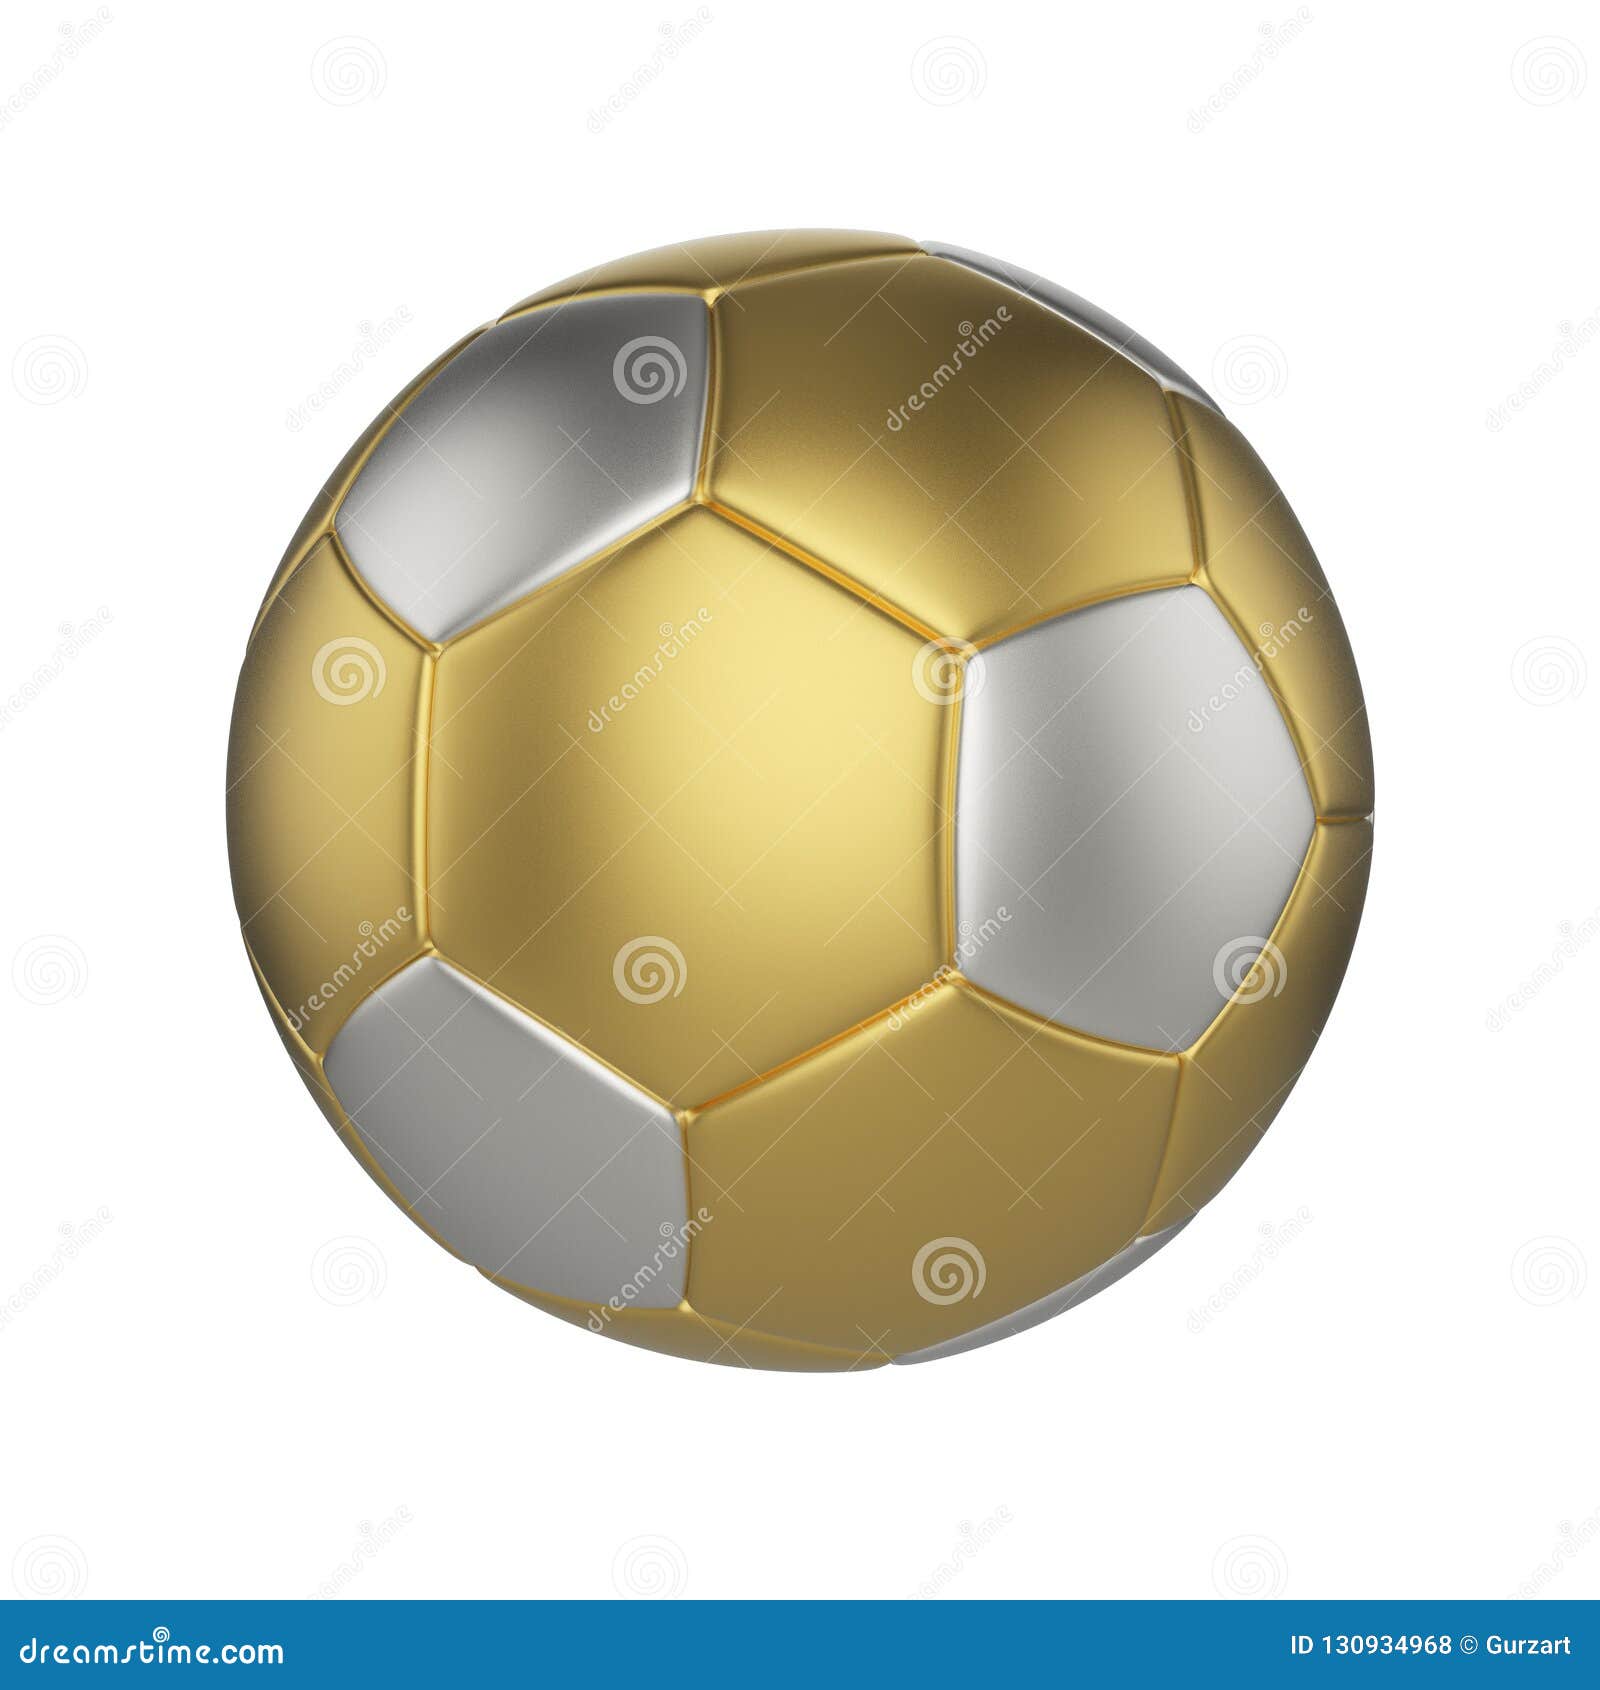 Soccer Ball Isolated On White Background. Gold And Silver Football Ball ...